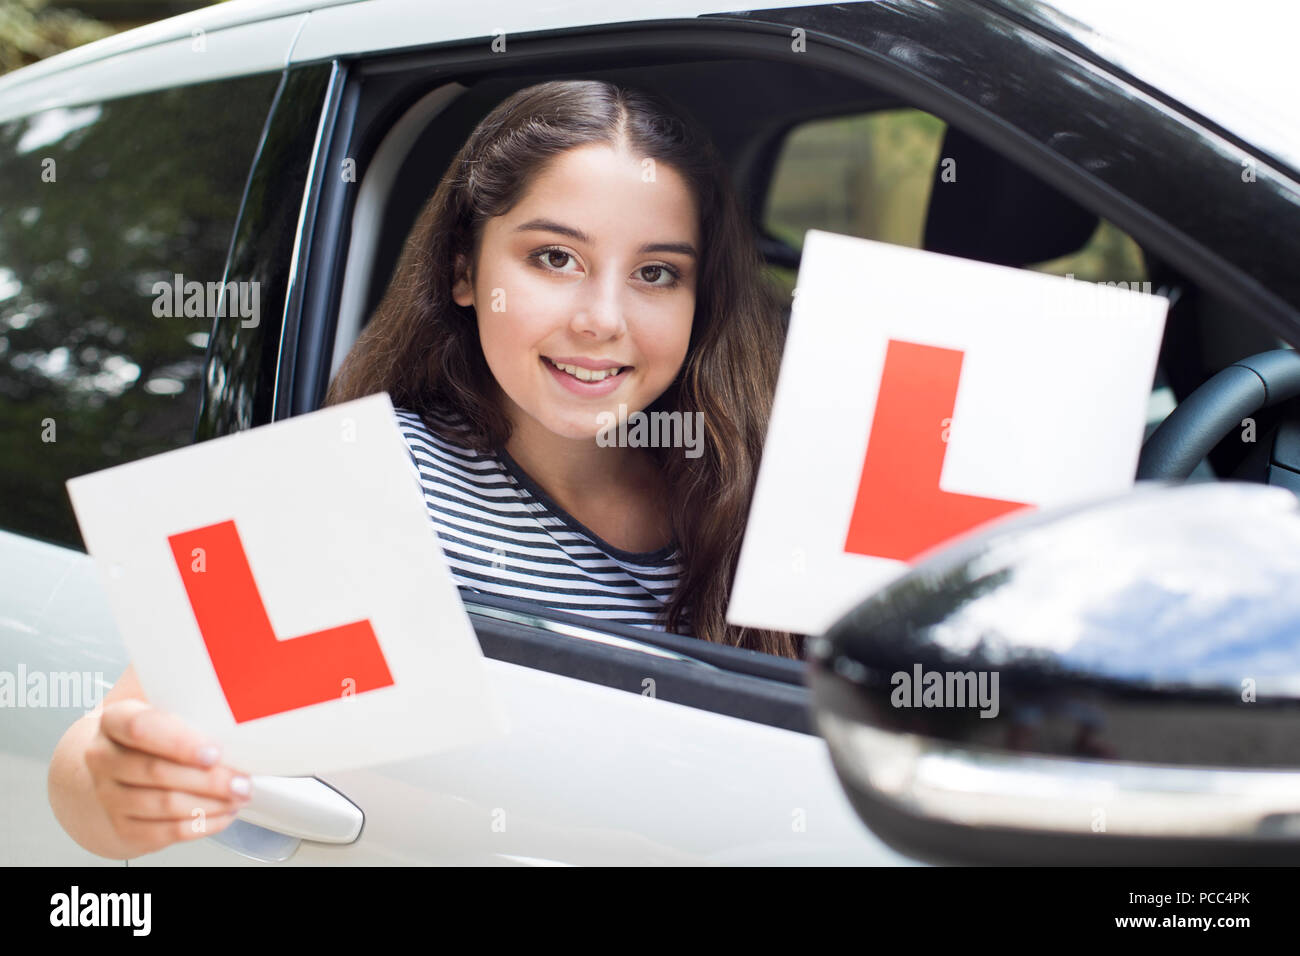 Portrait Of Teenage Girl Passing Driving Exam Holding Learner Plates Stock Photo